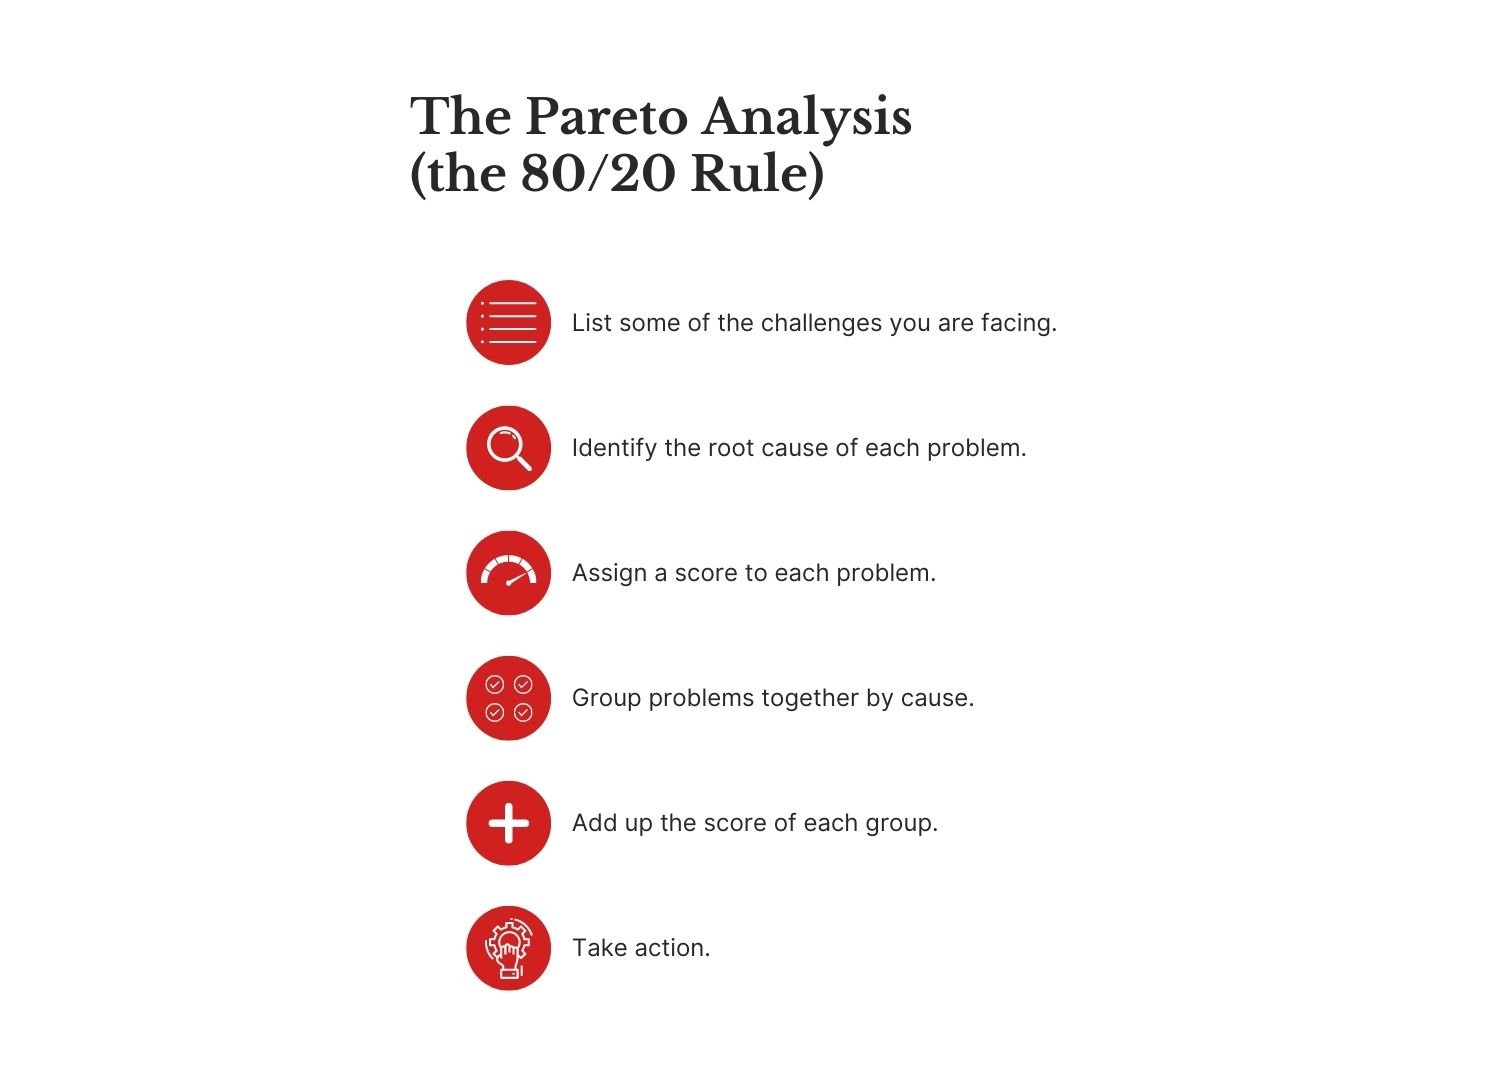 Infographic showing six steps to take for the Pareto Analysis (the 80/20 Rule).